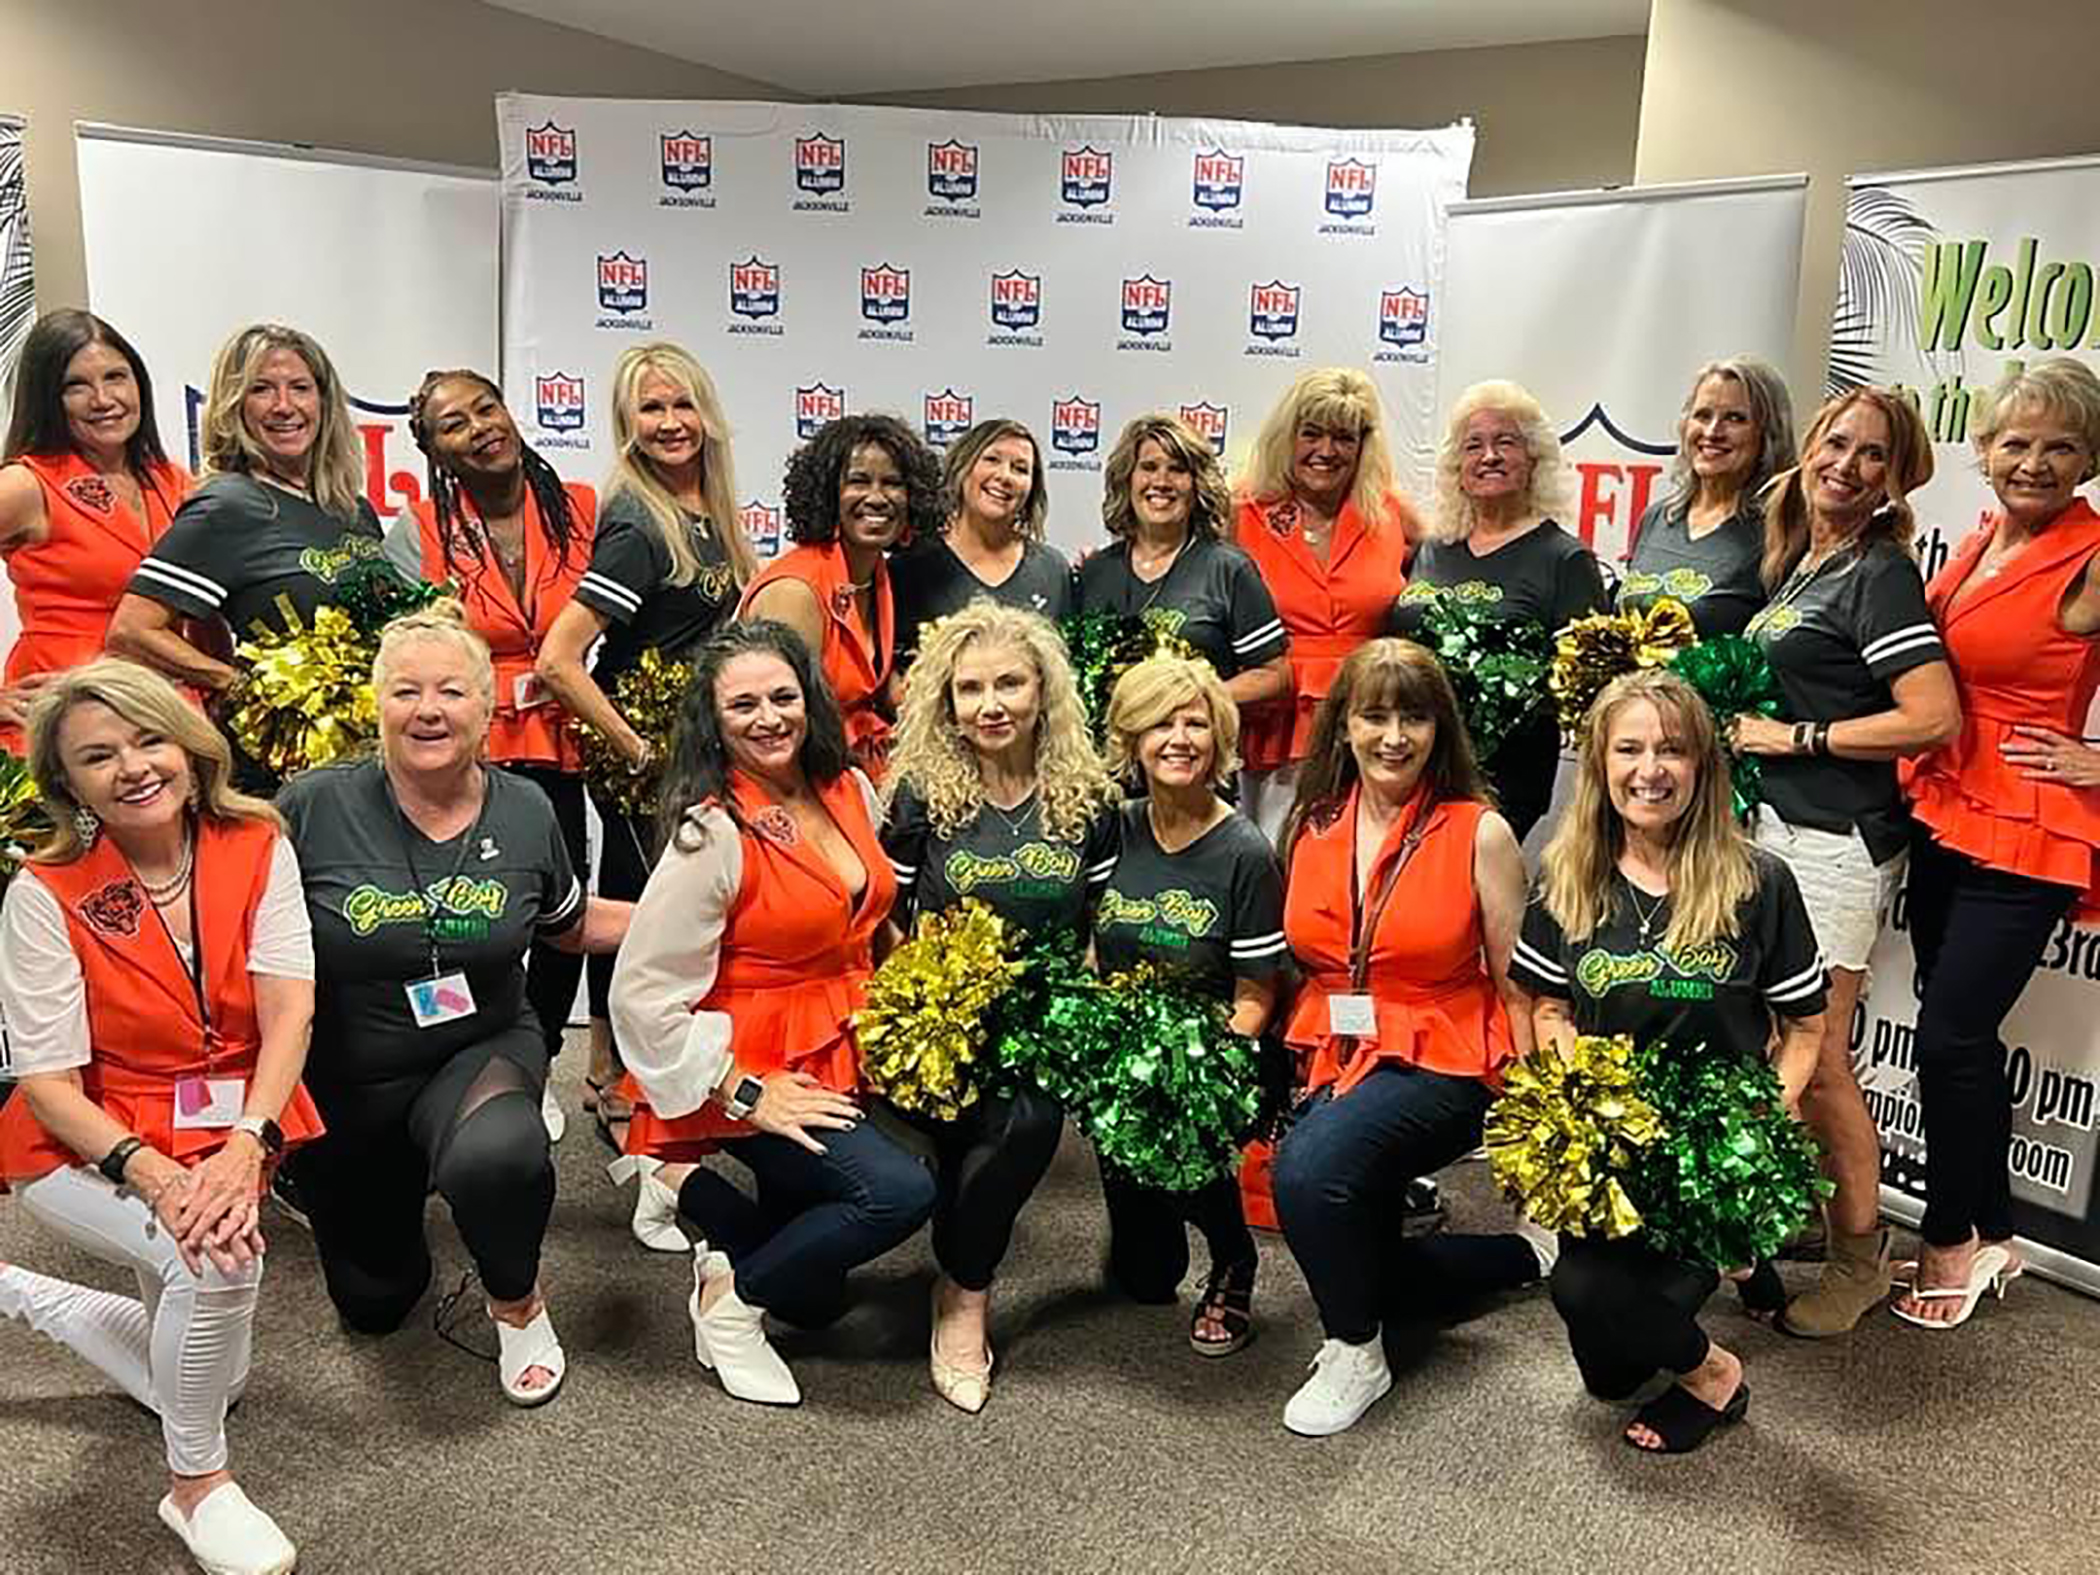 Former Chicago Bears and Green Bay Packers Cheerleaders at the National Football Cheerleaders Alumni Organization Conference